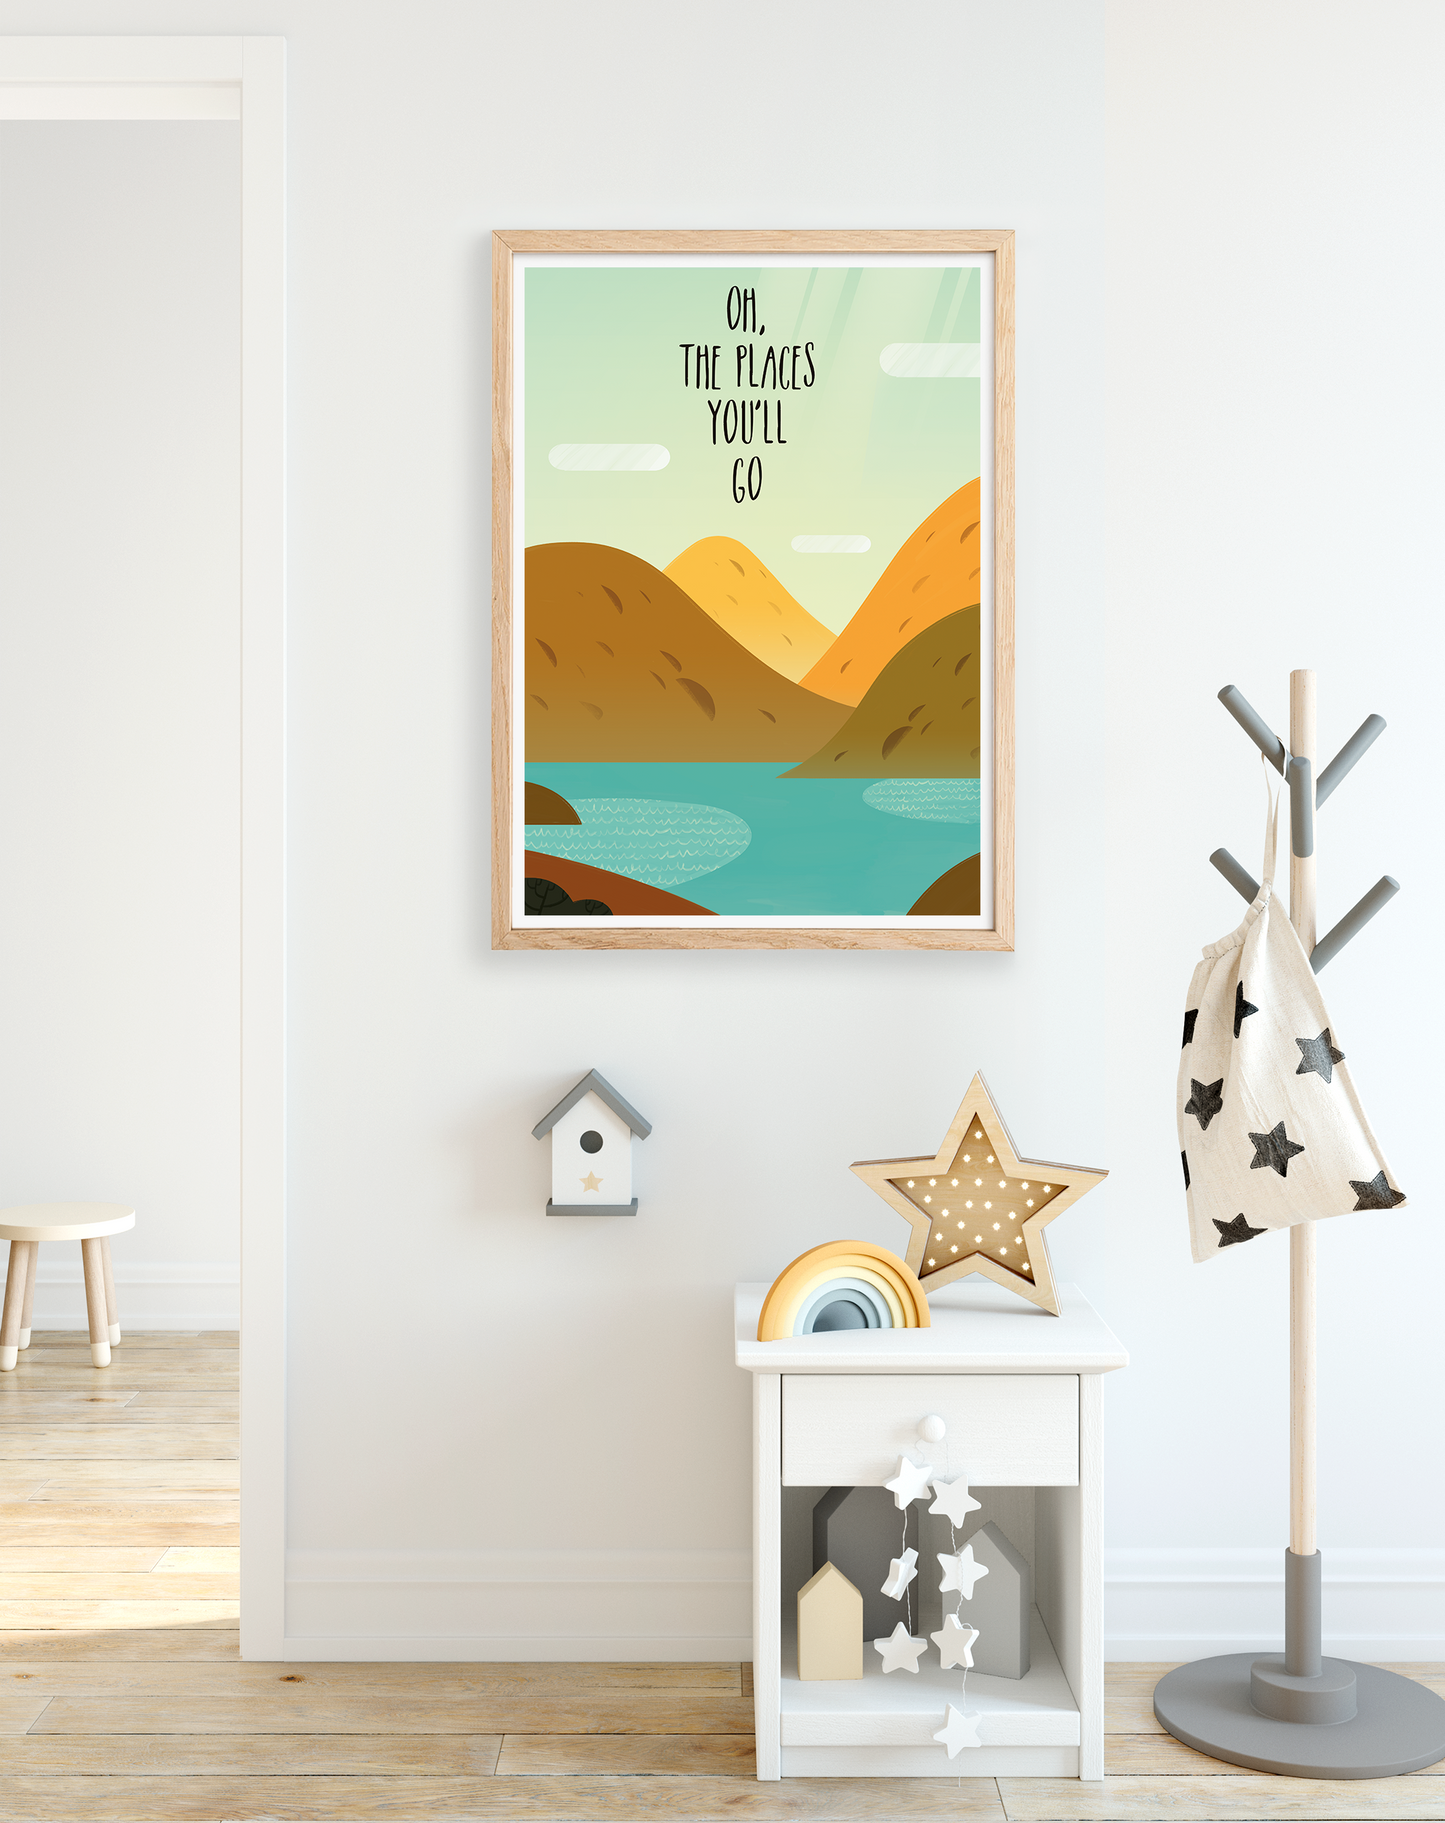 Oh, the places you'll go quote print